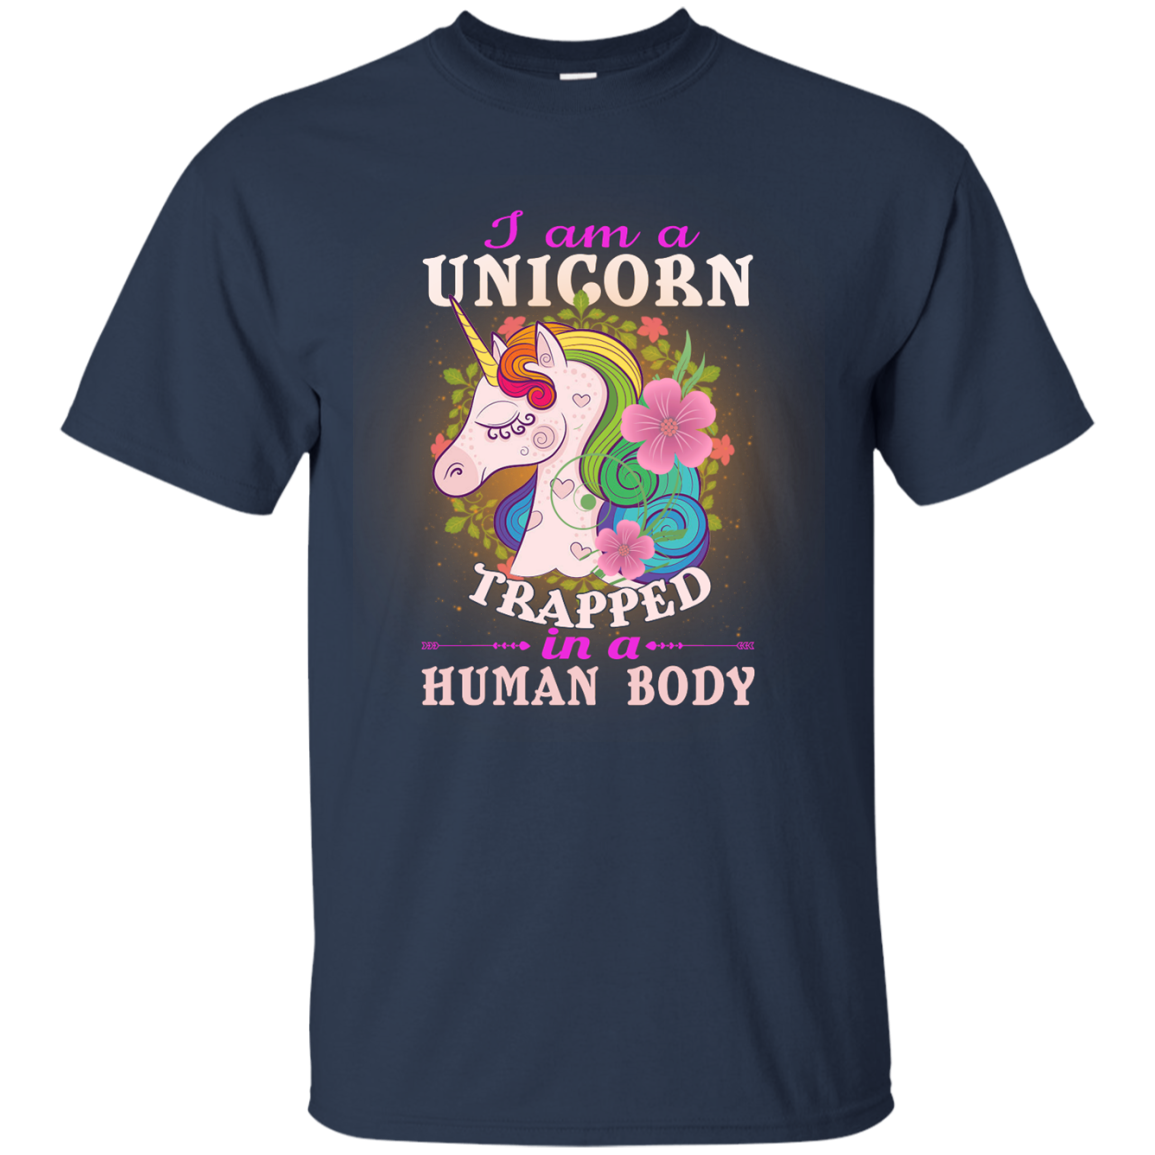 I am a Unicorn Trapped in a Human Body shirt, tank top